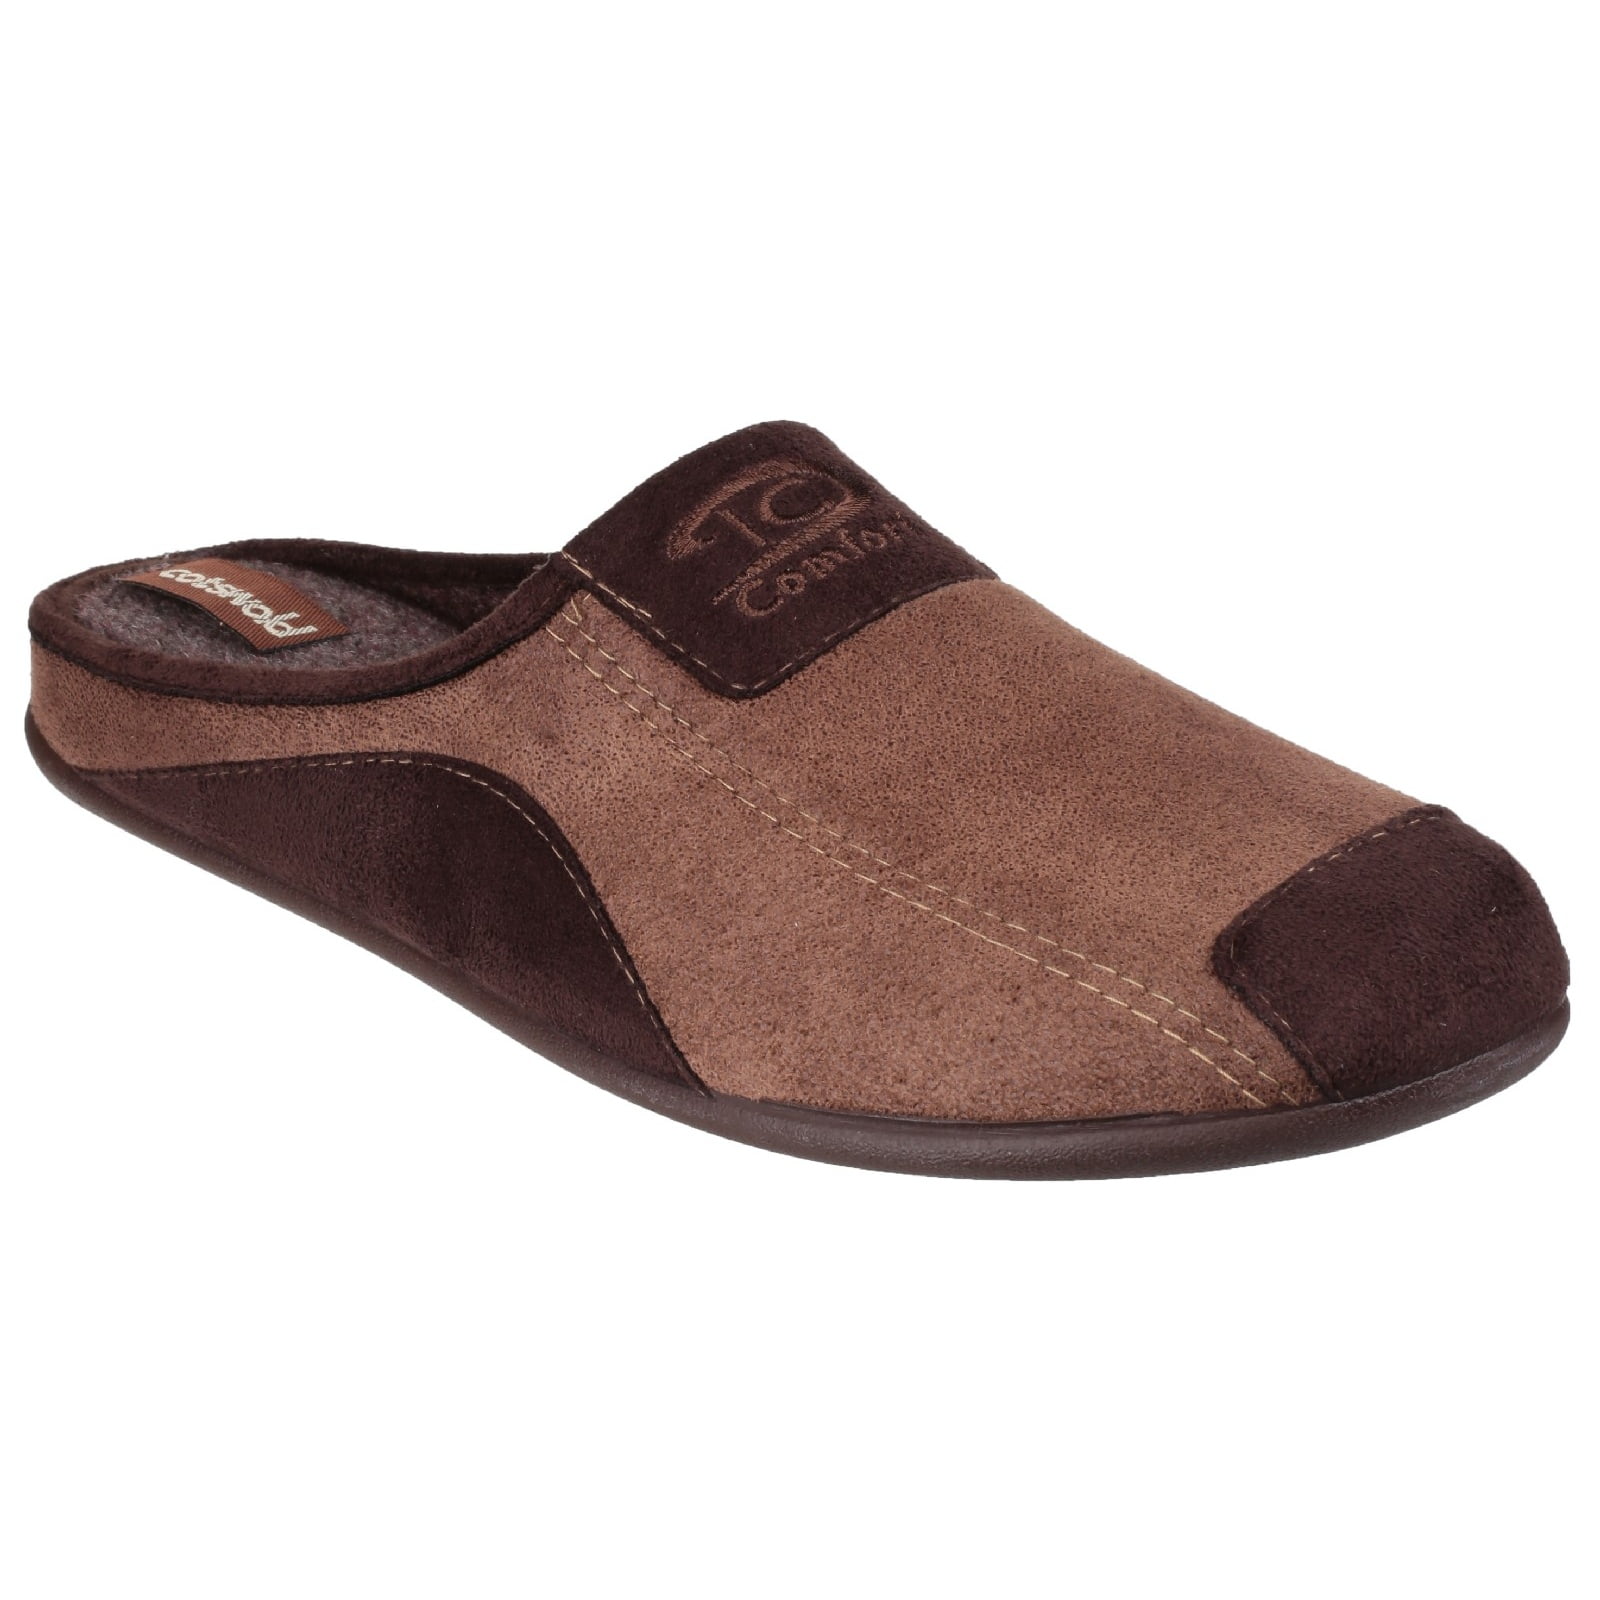 Cotswold WESTWELL Mens Slip On Contrast Two Tone Comfort Mule Slippers Brown 